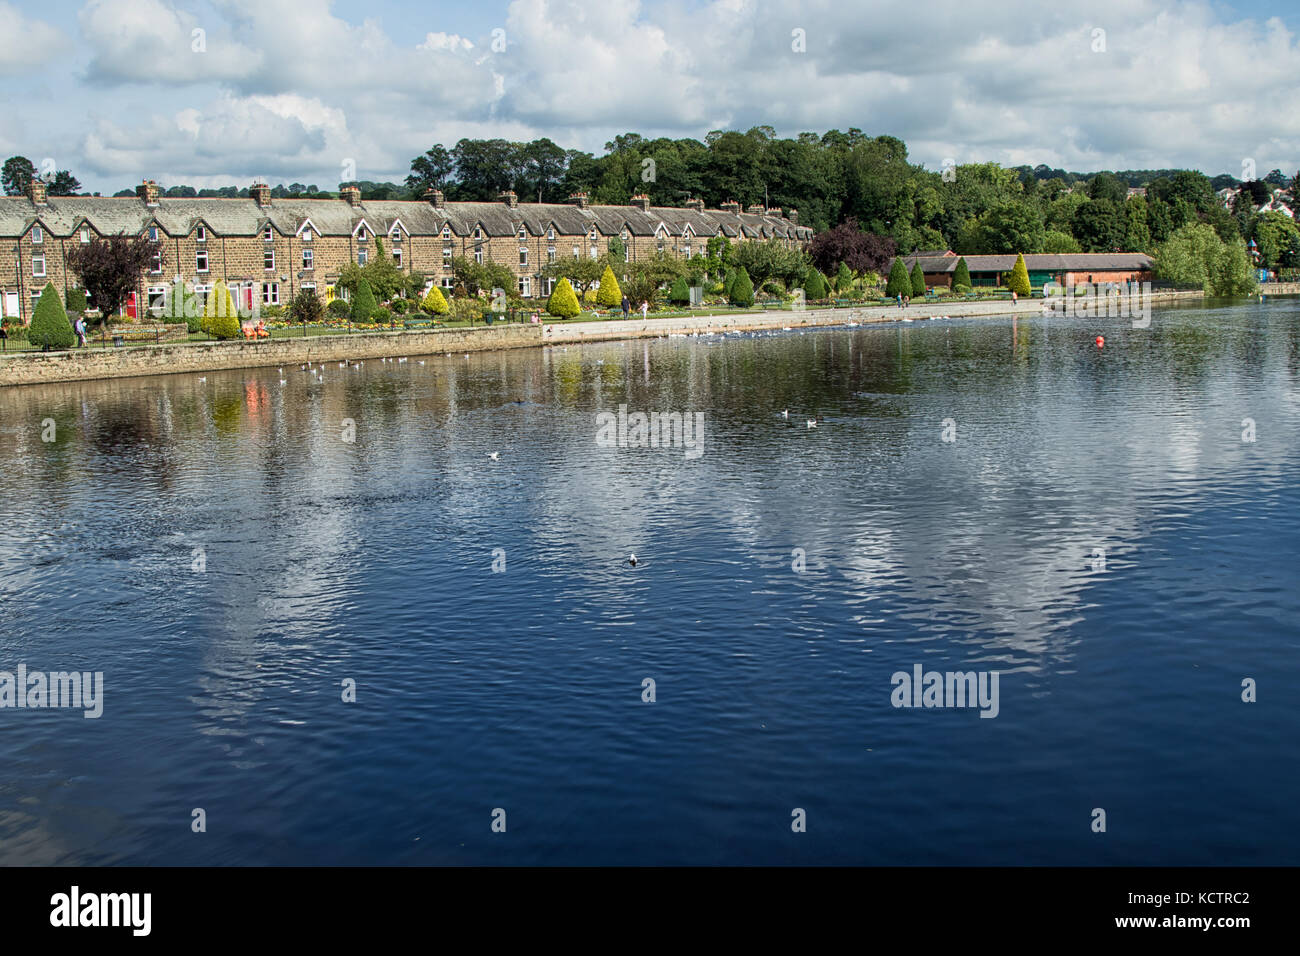 River Wharfe,Oakwood Park, Otley, West Yorkshire, Angleterre, Royaume-Uni. Banque D'Images